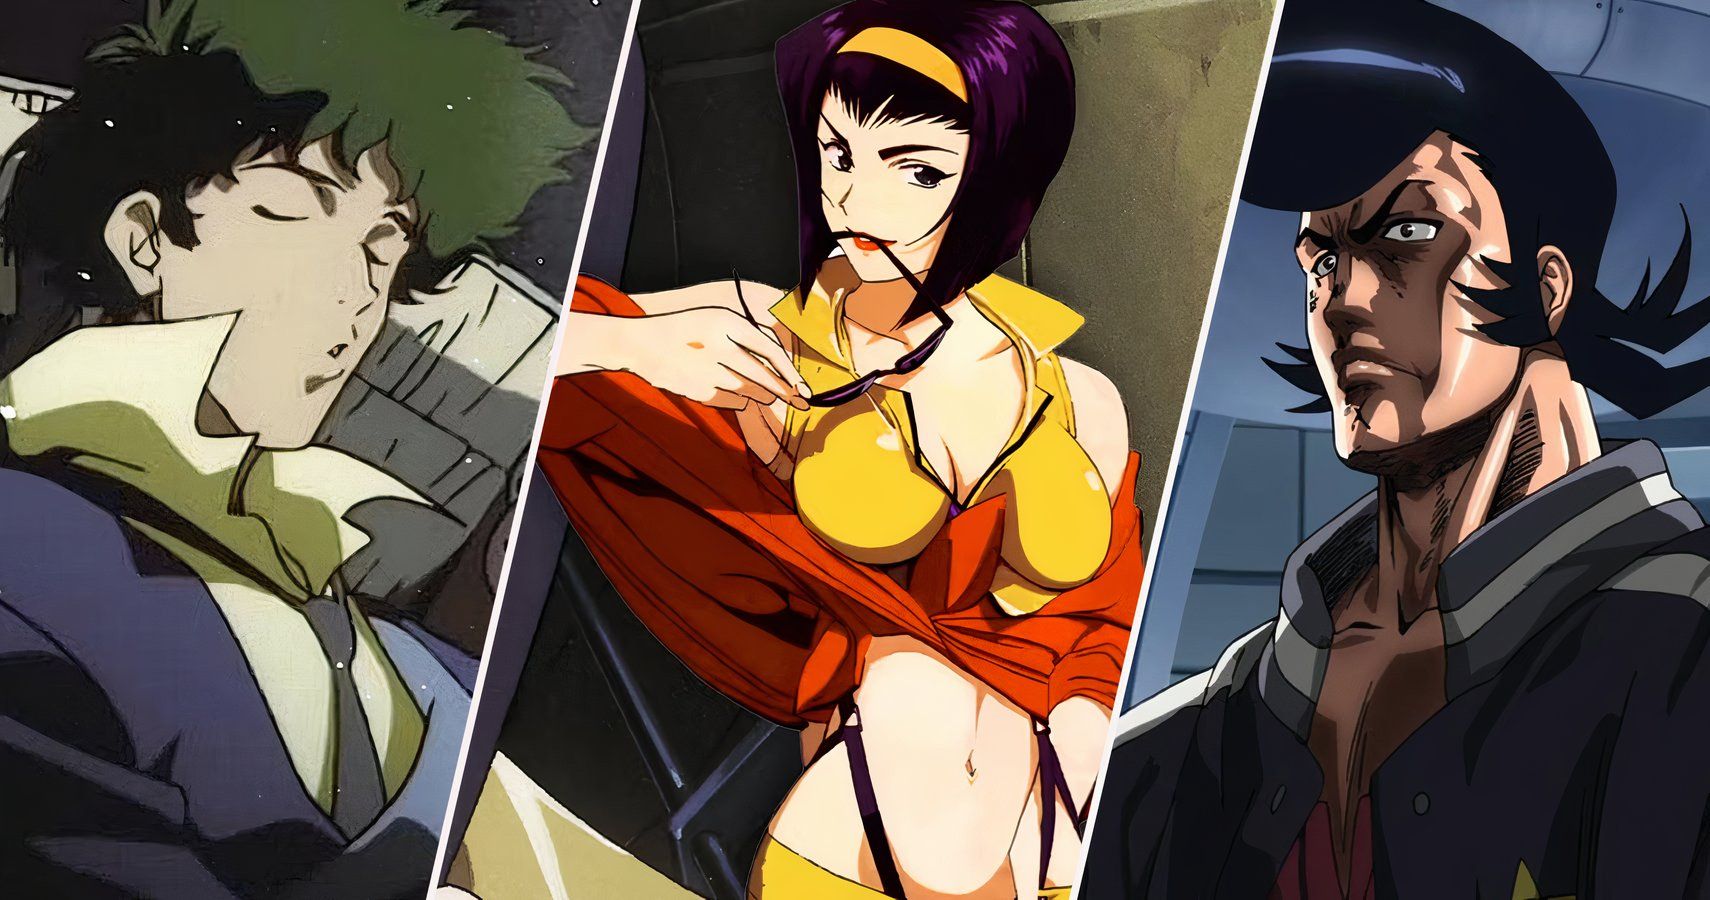 Spke and Faye from Cowboy Bebop, and Space Dandy